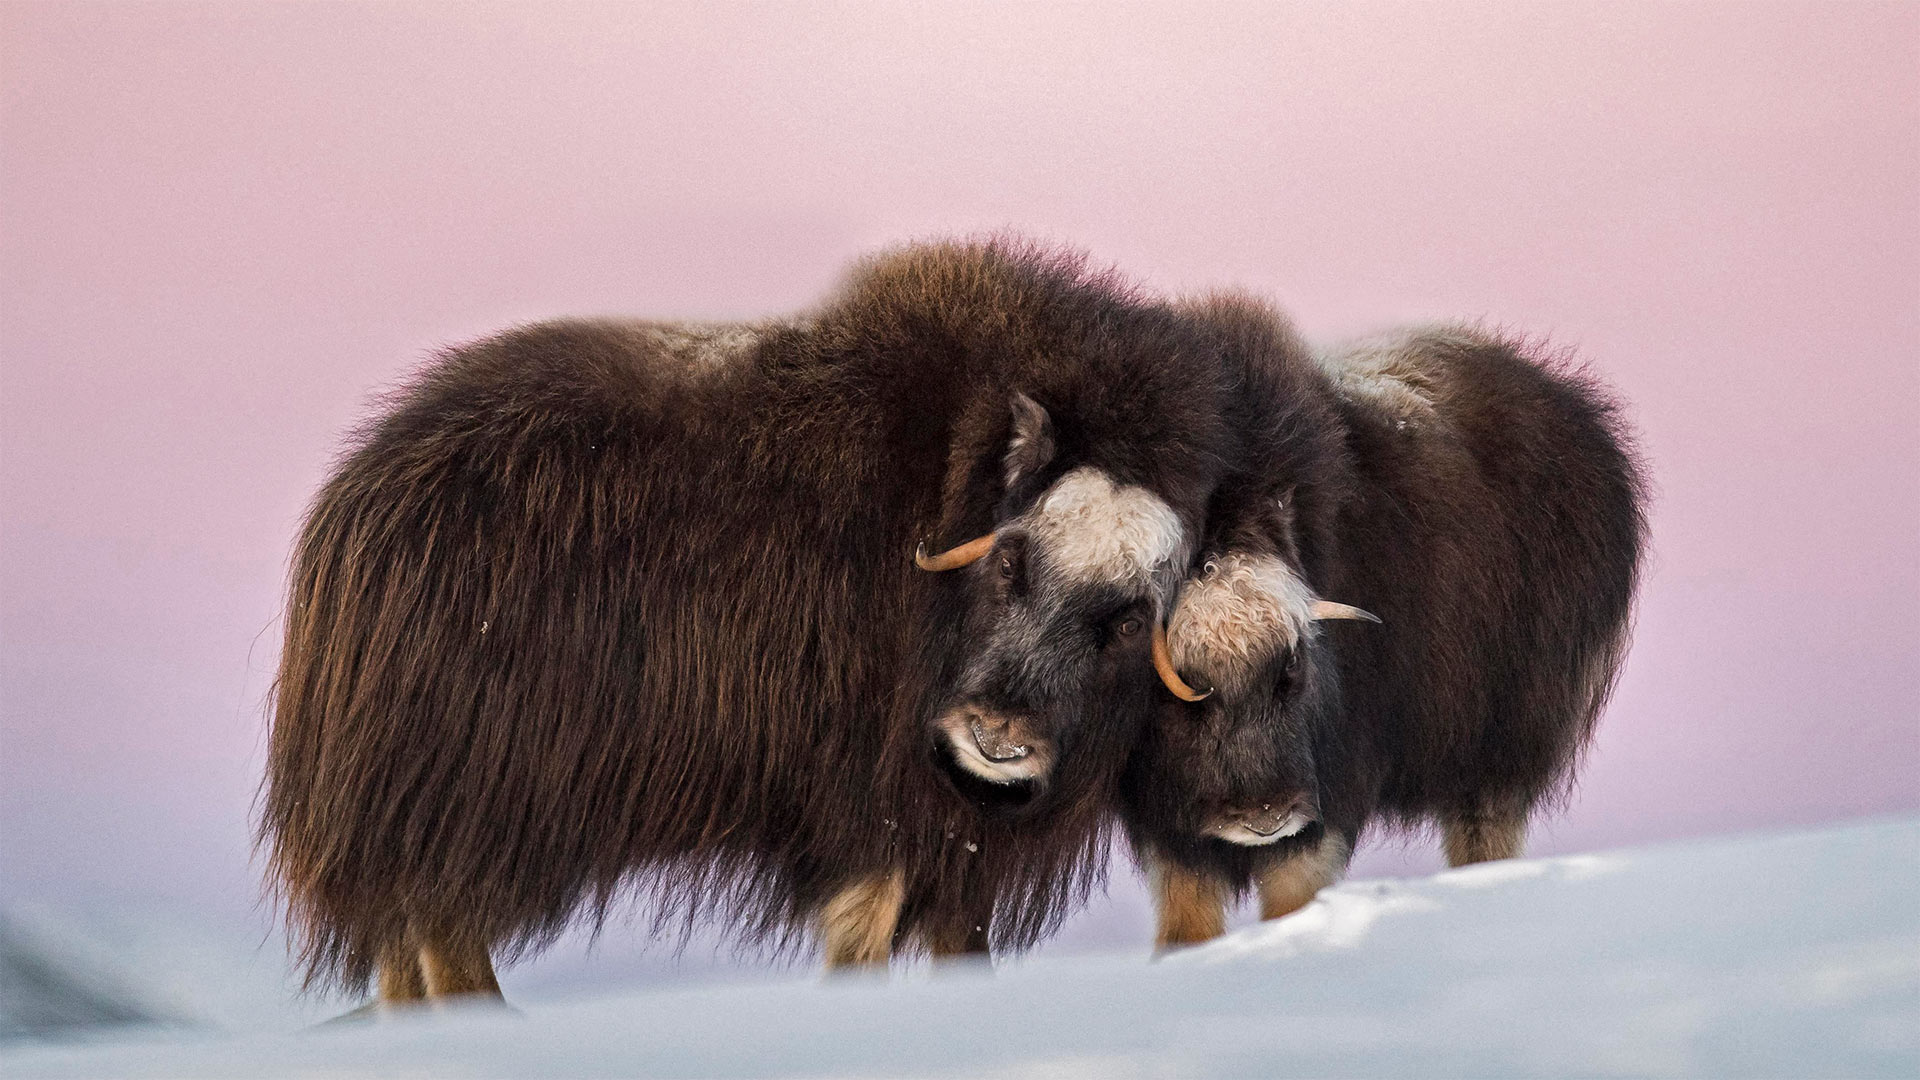 Muskox mother and calf in Dovre-Sunndalsfjella National Park, Norway - Robert Haasmann